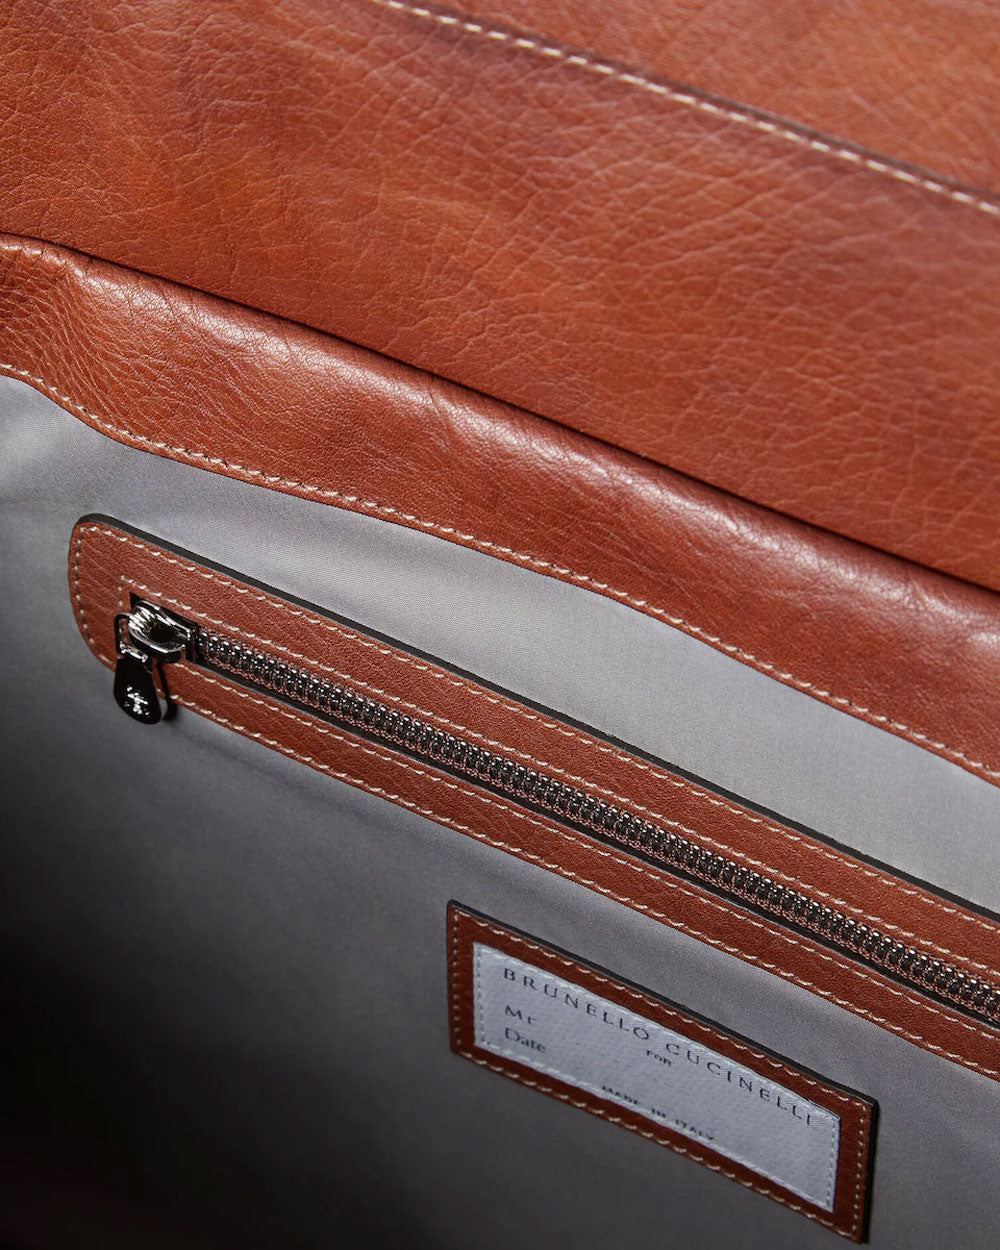 Brown Leather Travel Bag